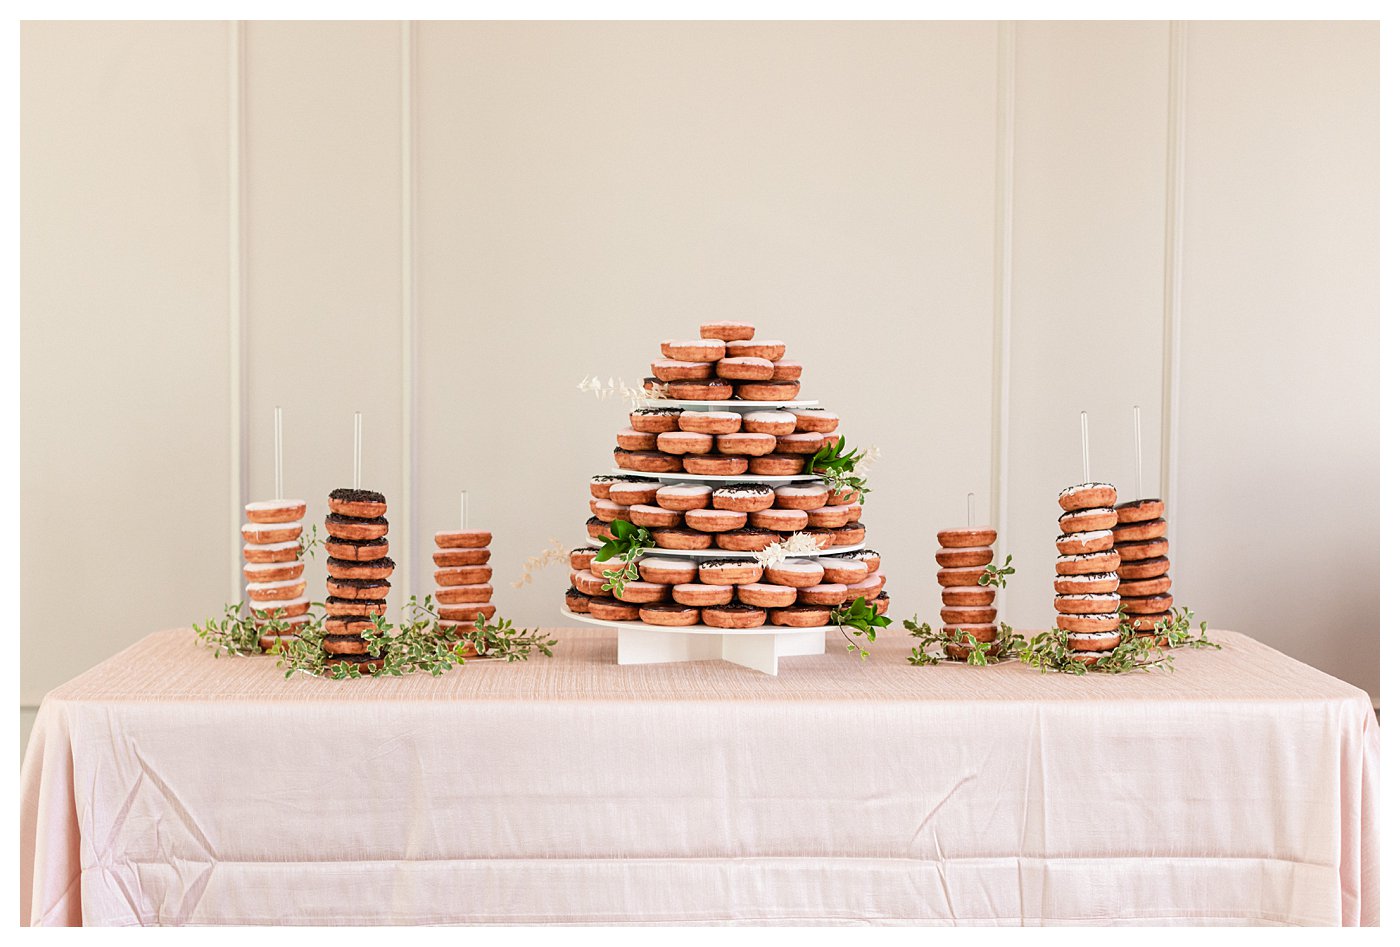 Donut Tiers by Amanda and Grady Photography